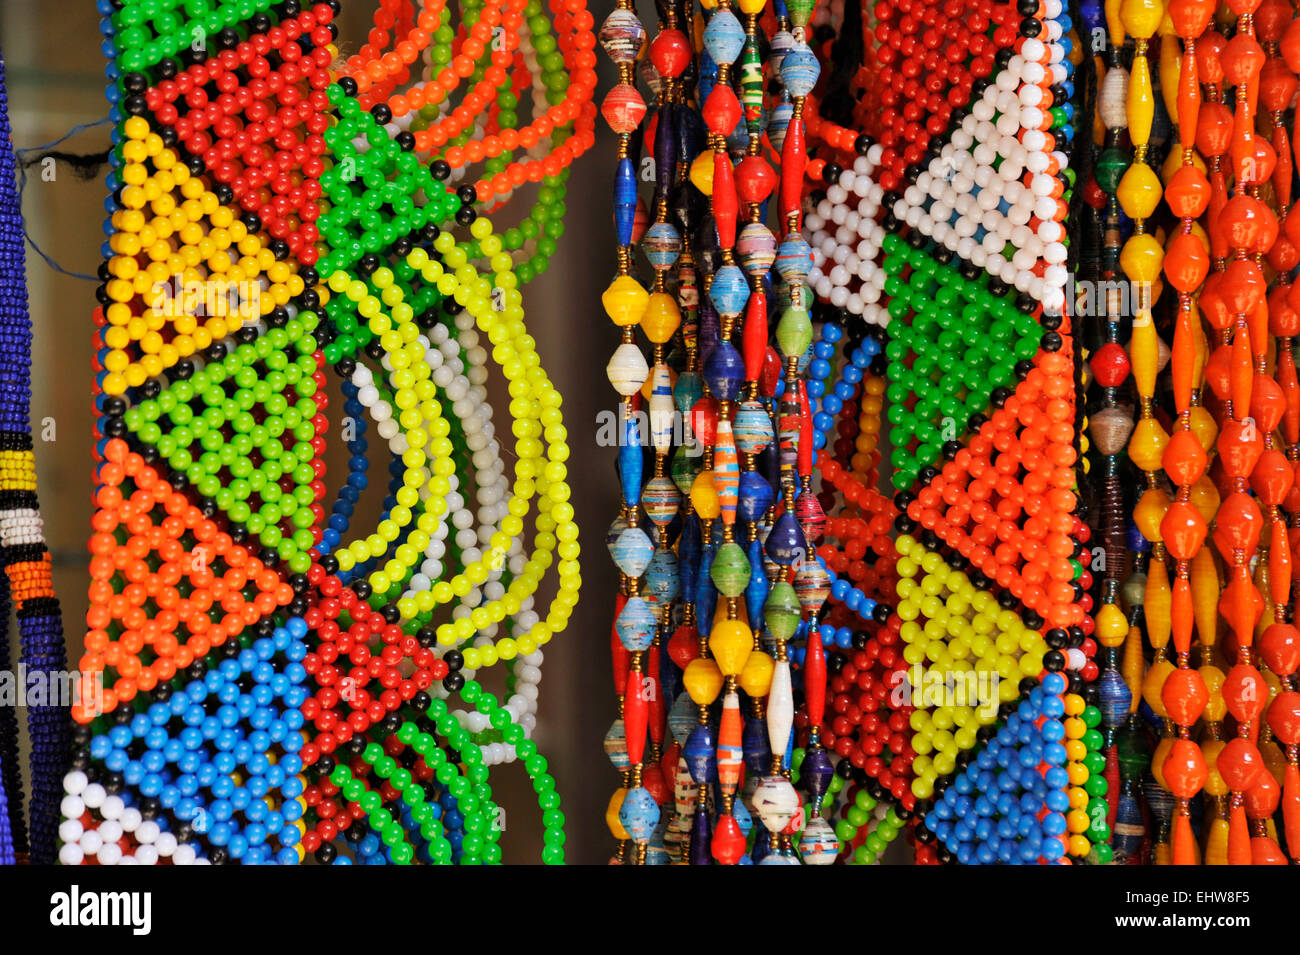 Traditional beaded Zulu costume jewellery and colourful necklaces for sale to tourists at Victoria Street Indian market, Durban, KZN, South Africa Stock Photo